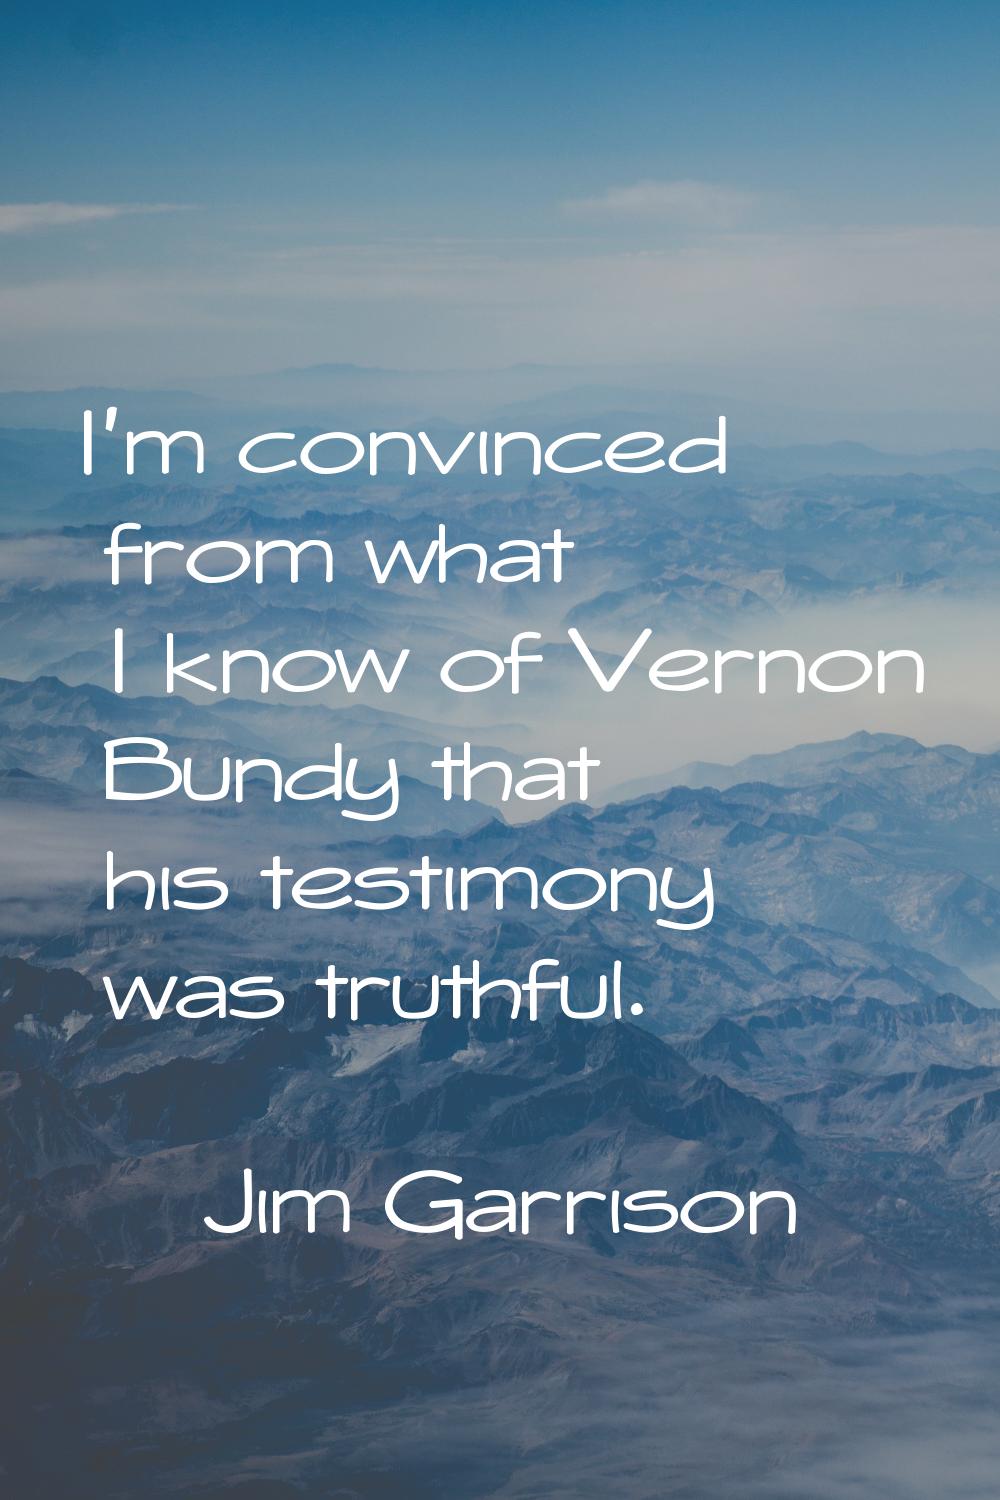 I'm convinced from what I know of Vernon Bundy that his testimony was truthful.